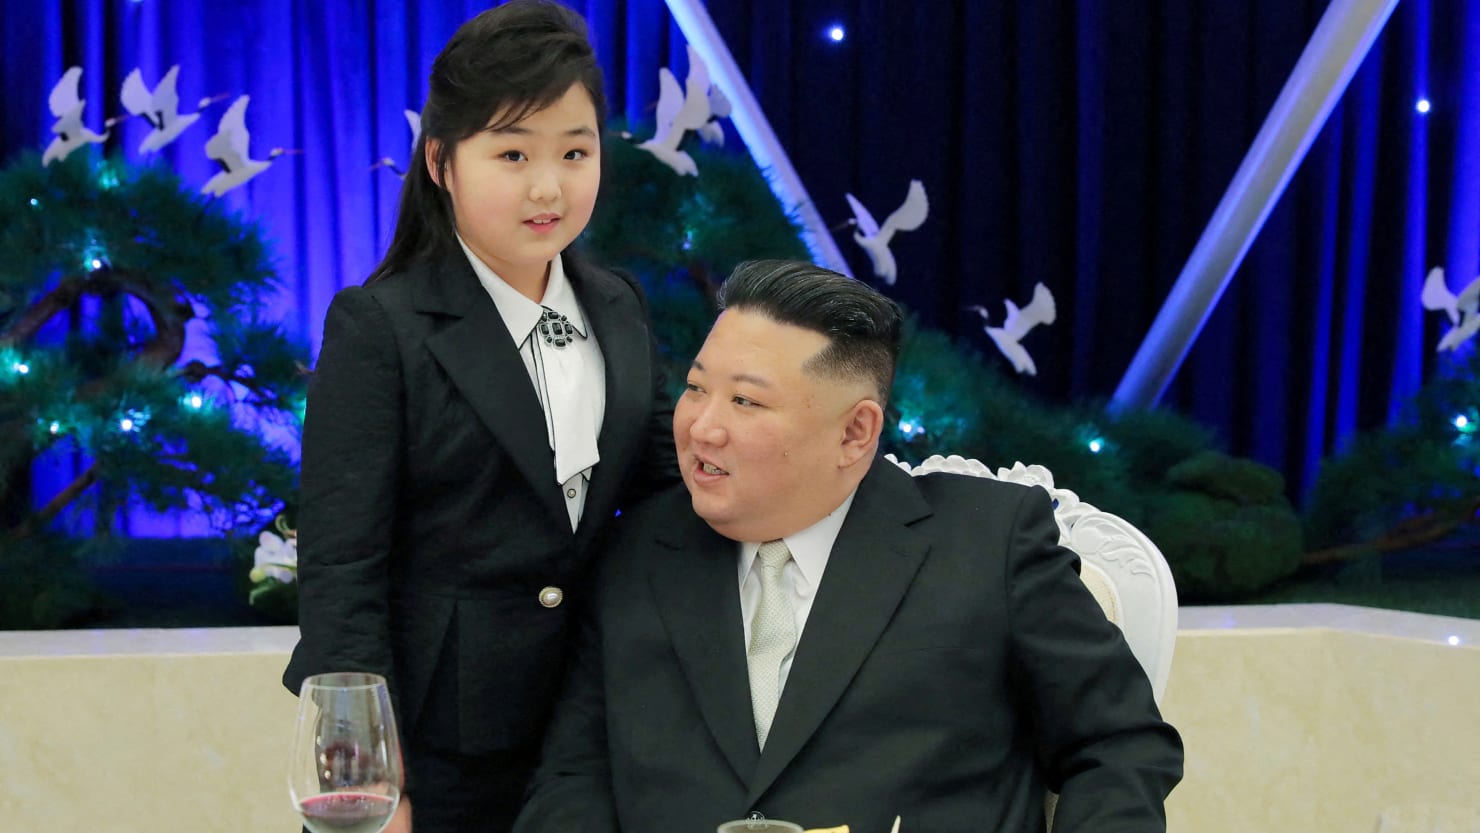 Kim Jong Uns Daughter Ju Ae Could Knock Out His Sister, Yo Jong, in North Korea Succession Feud